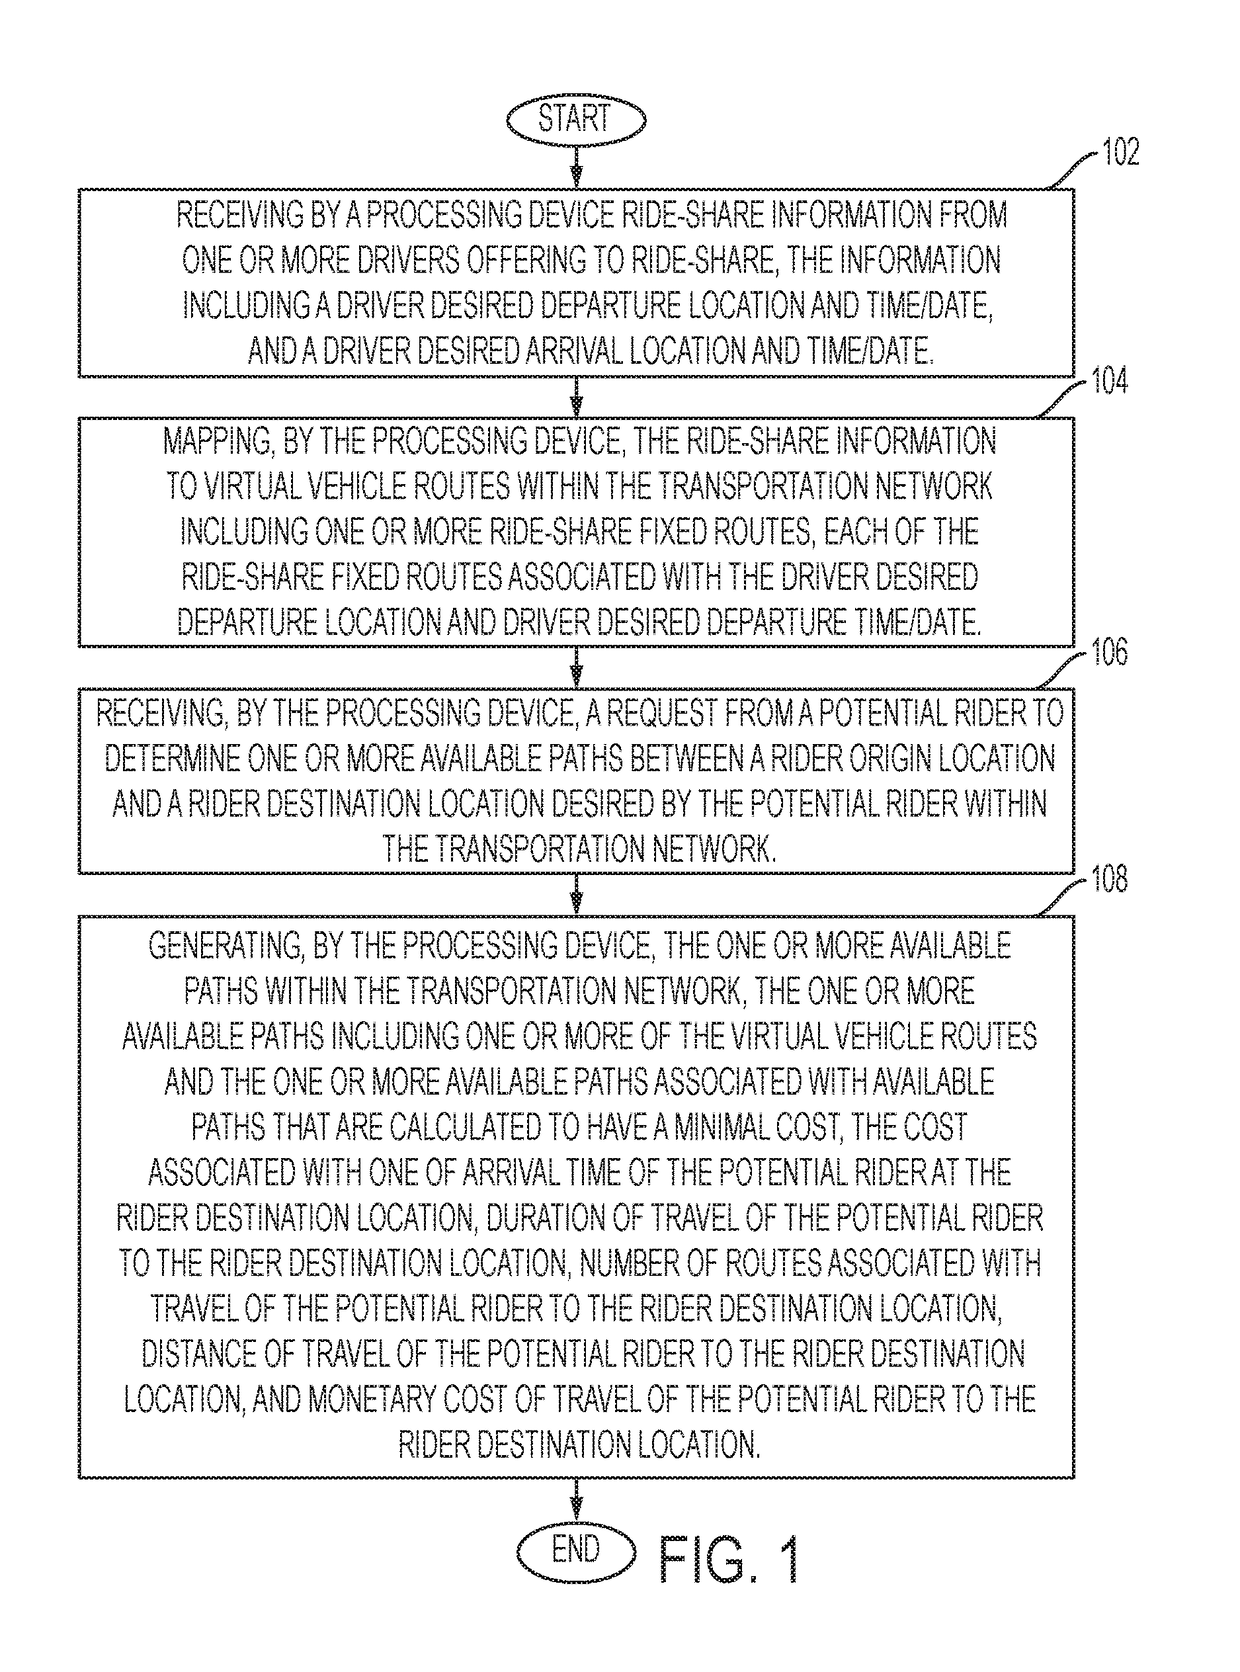 System and method for generating available ride-share paths in a transportation network